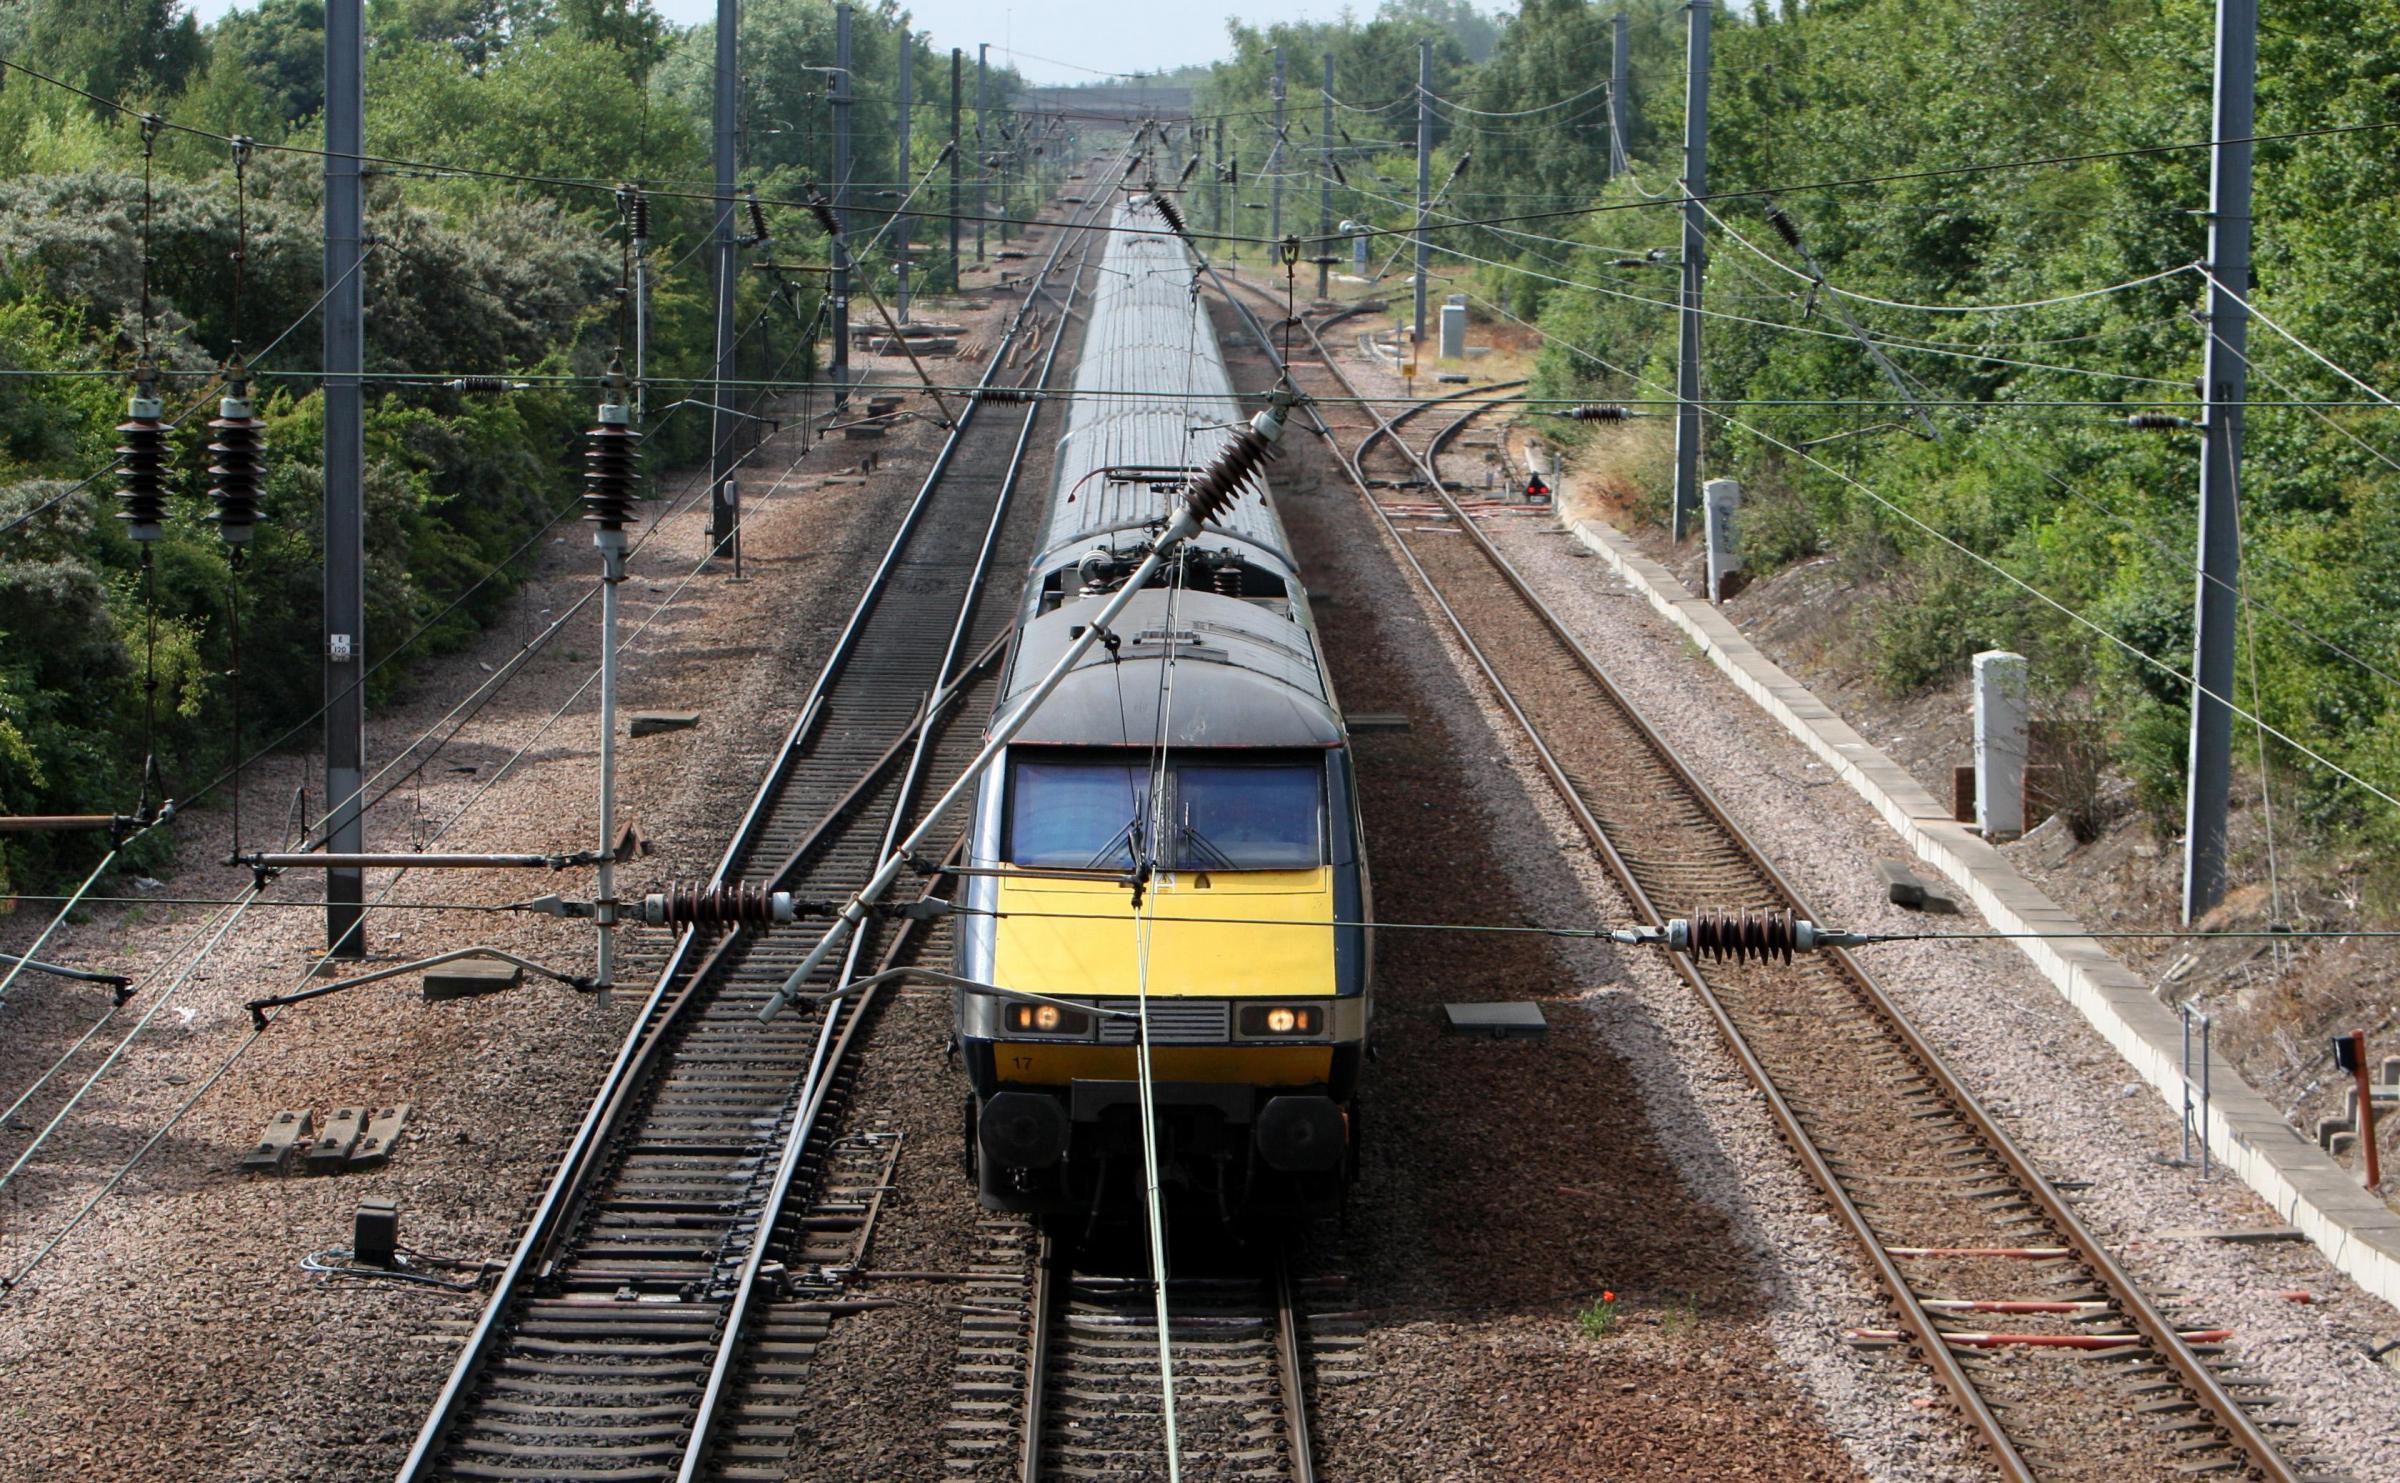 Person hit by train at Northallerton - lines now reopen